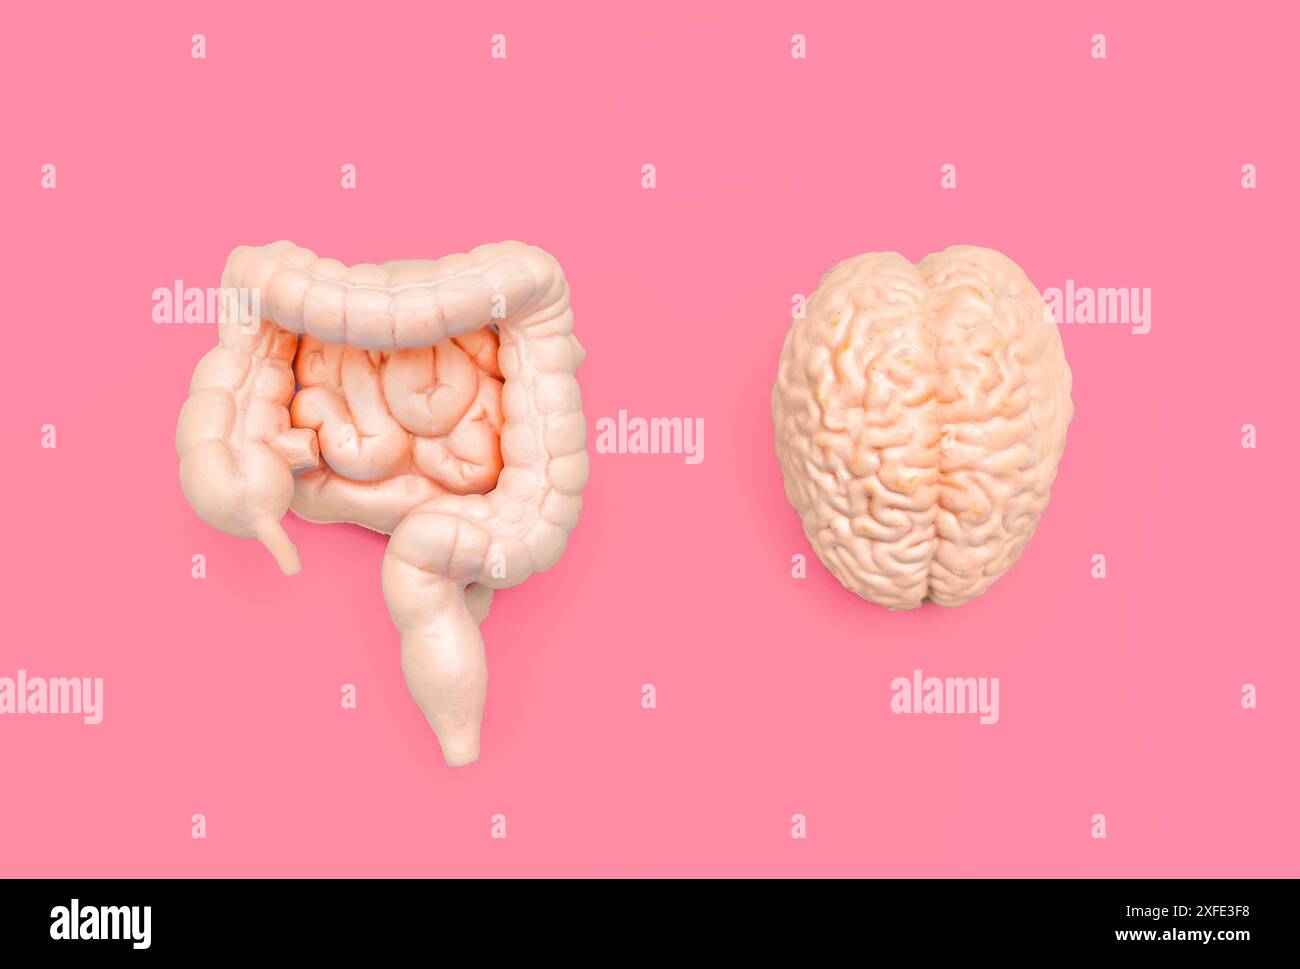 Anatomical brain and intestines models placed side by side on a pink background. Mind-gut relationship concept. Stock Photo